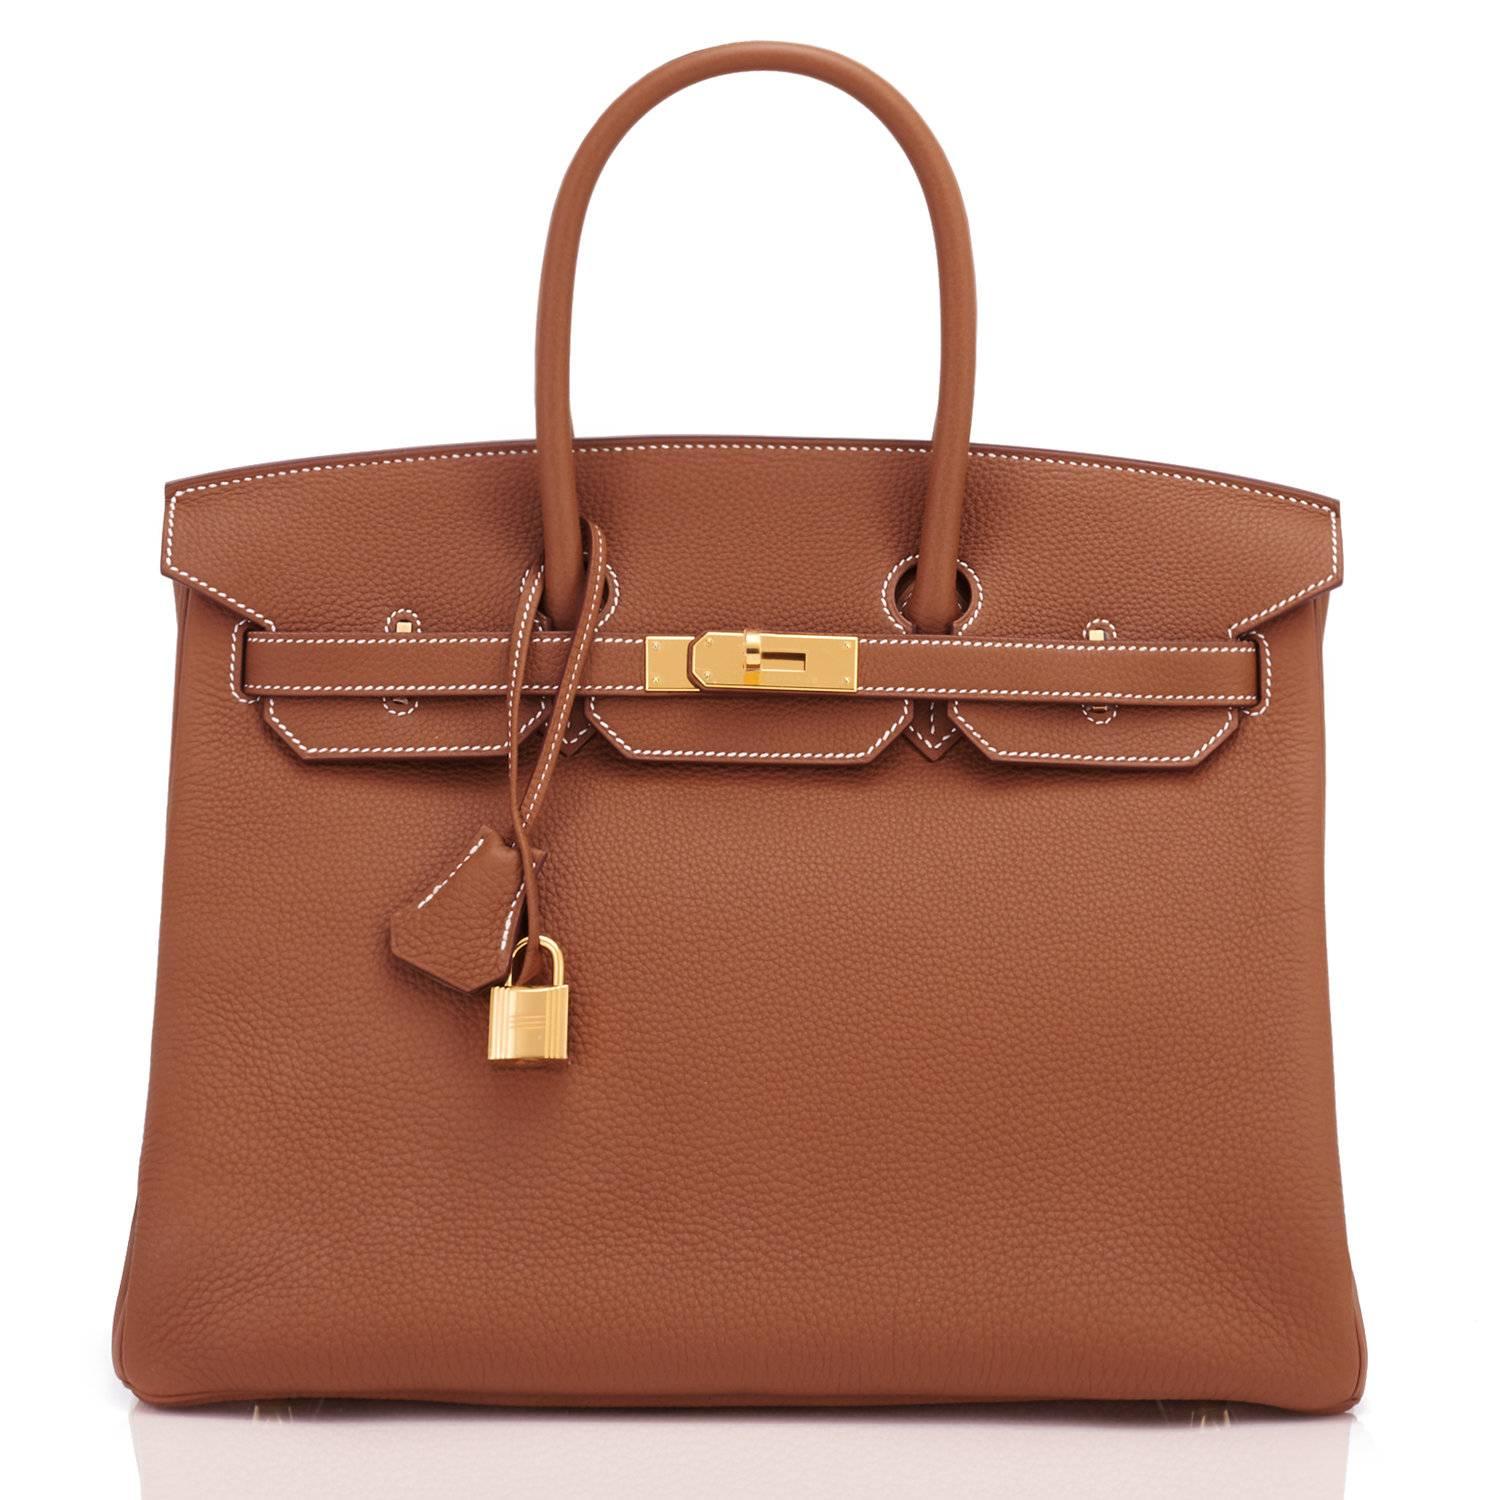 Hermes Birkin 35 Gold Togo Tan Gold Hardware Bag Brand New in Box In New Condition For Sale In New York, NY